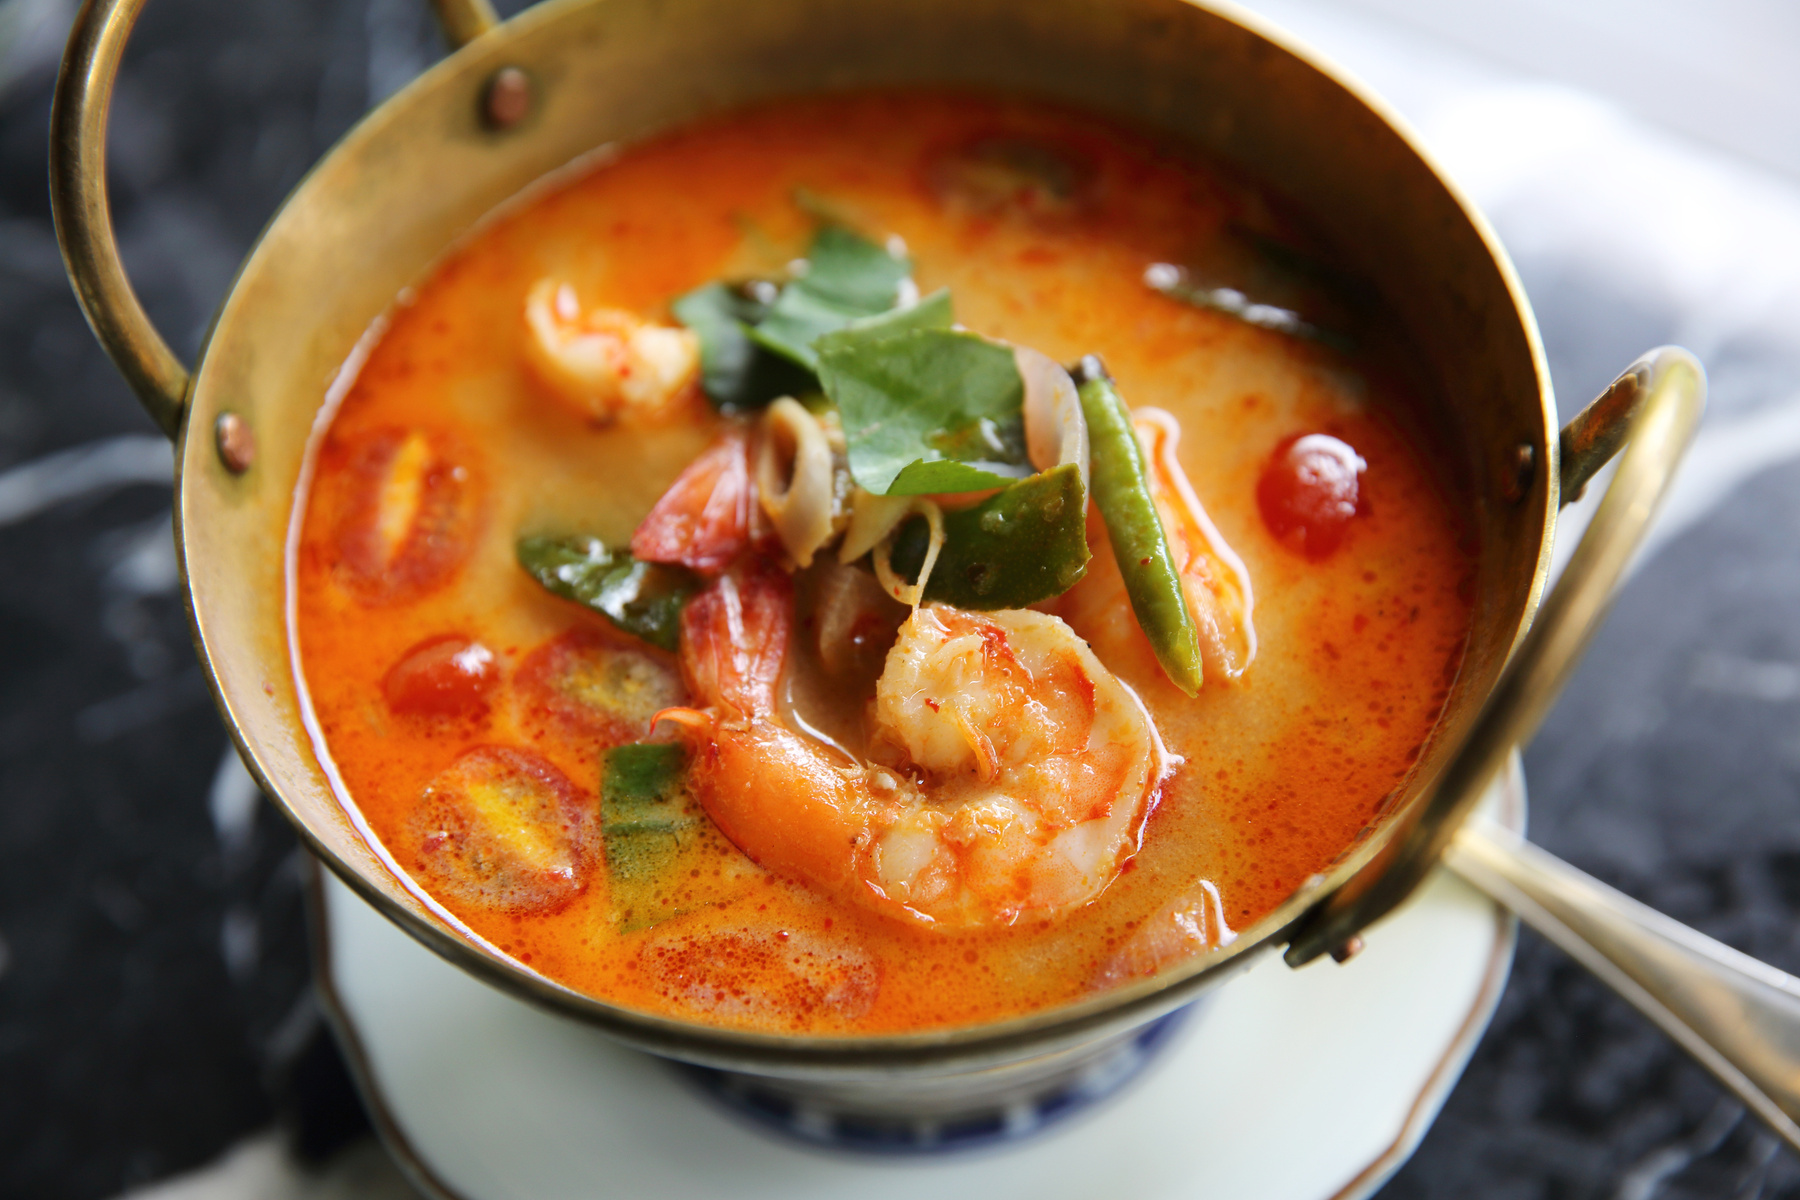 Tom Yum Soup: A flavourful Thai appetizer from KB Thai in Woy Woy, perfect for starting your meal